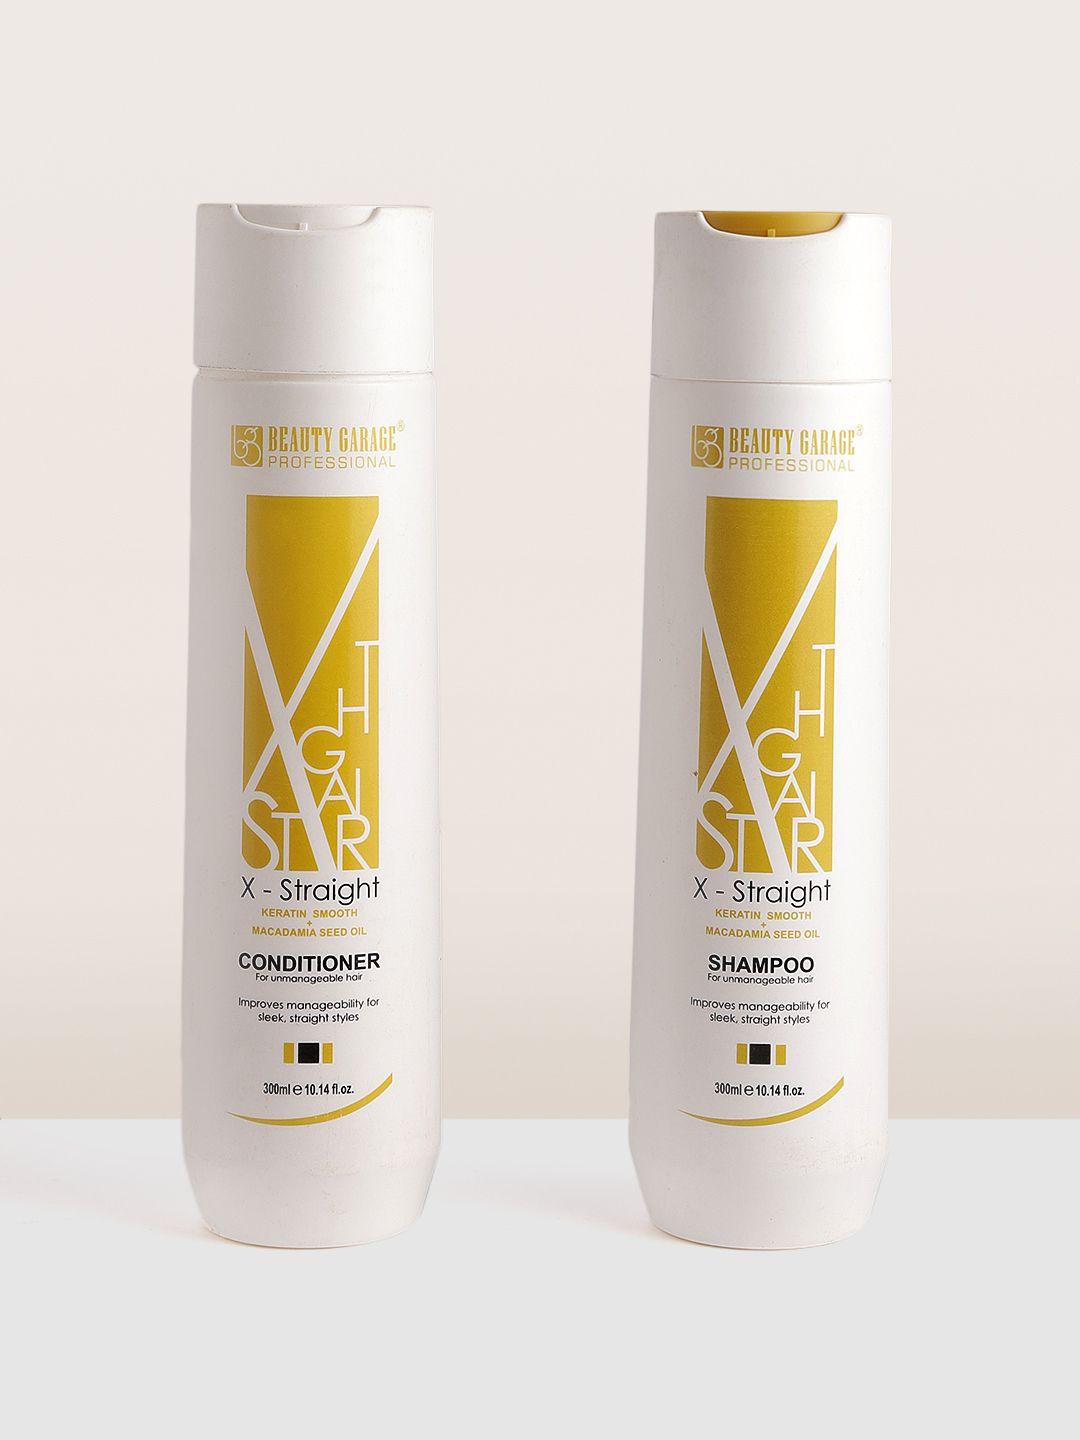 beauty garage set of x-straight shampoo & conditioner with keratin - 300ml each